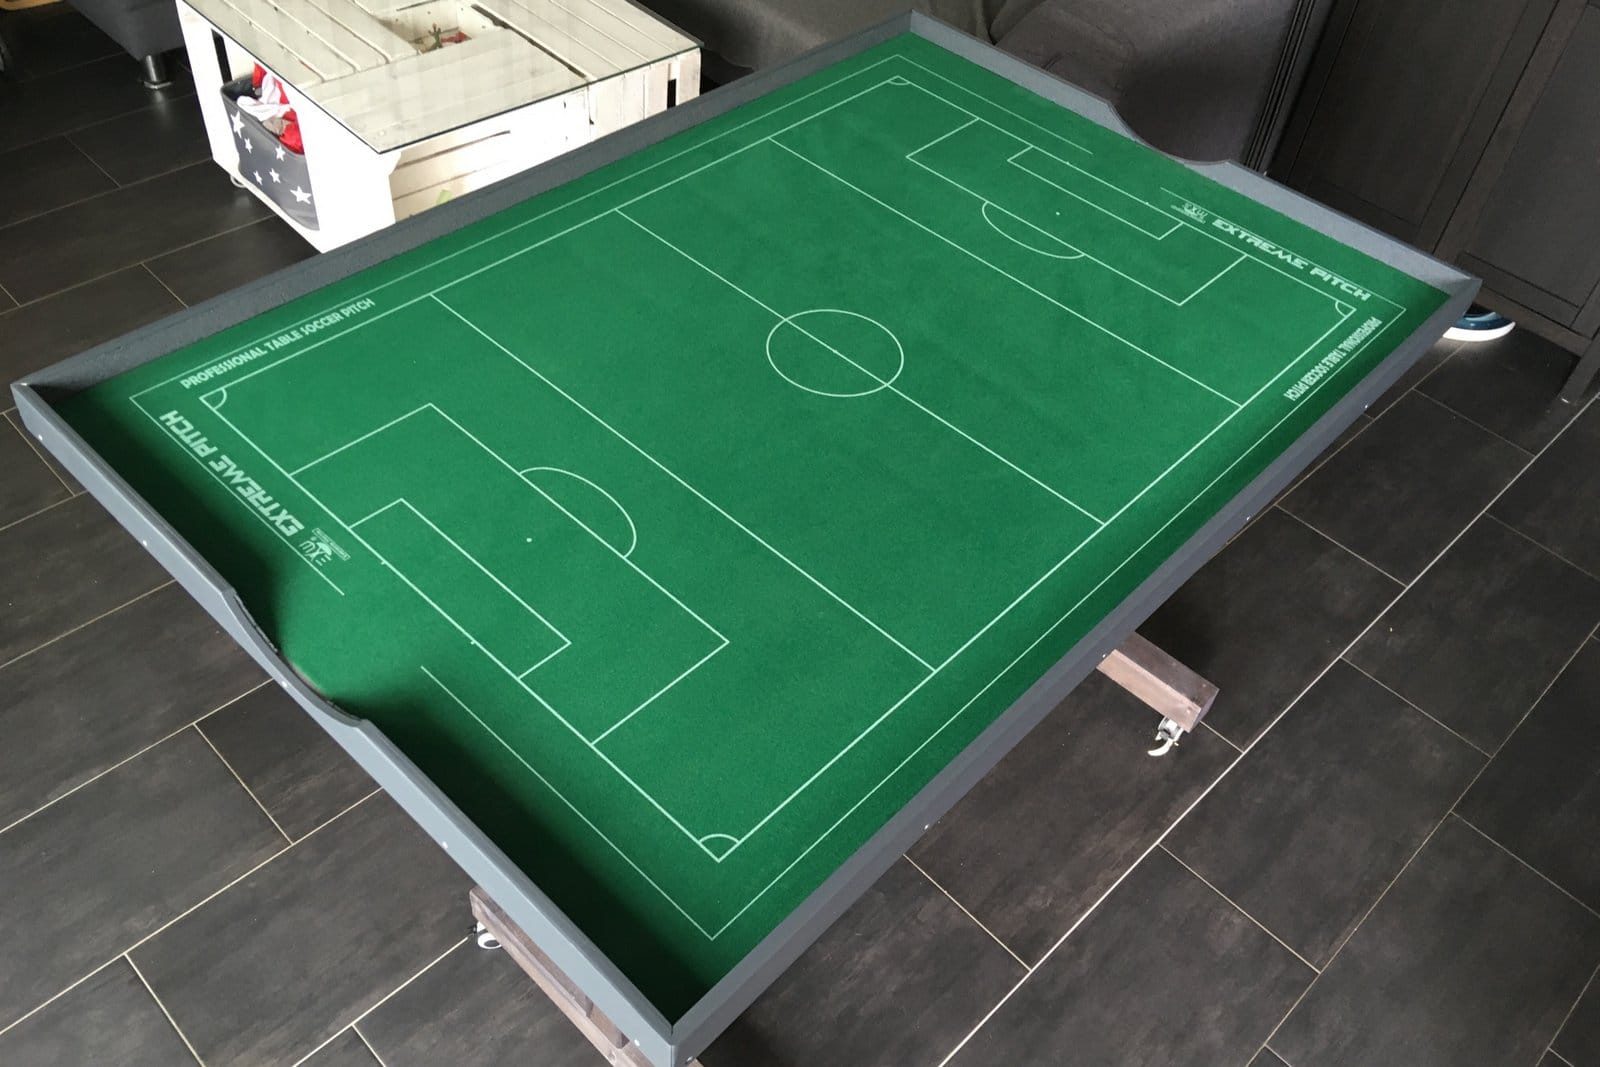 Subbuteo: a place for table football